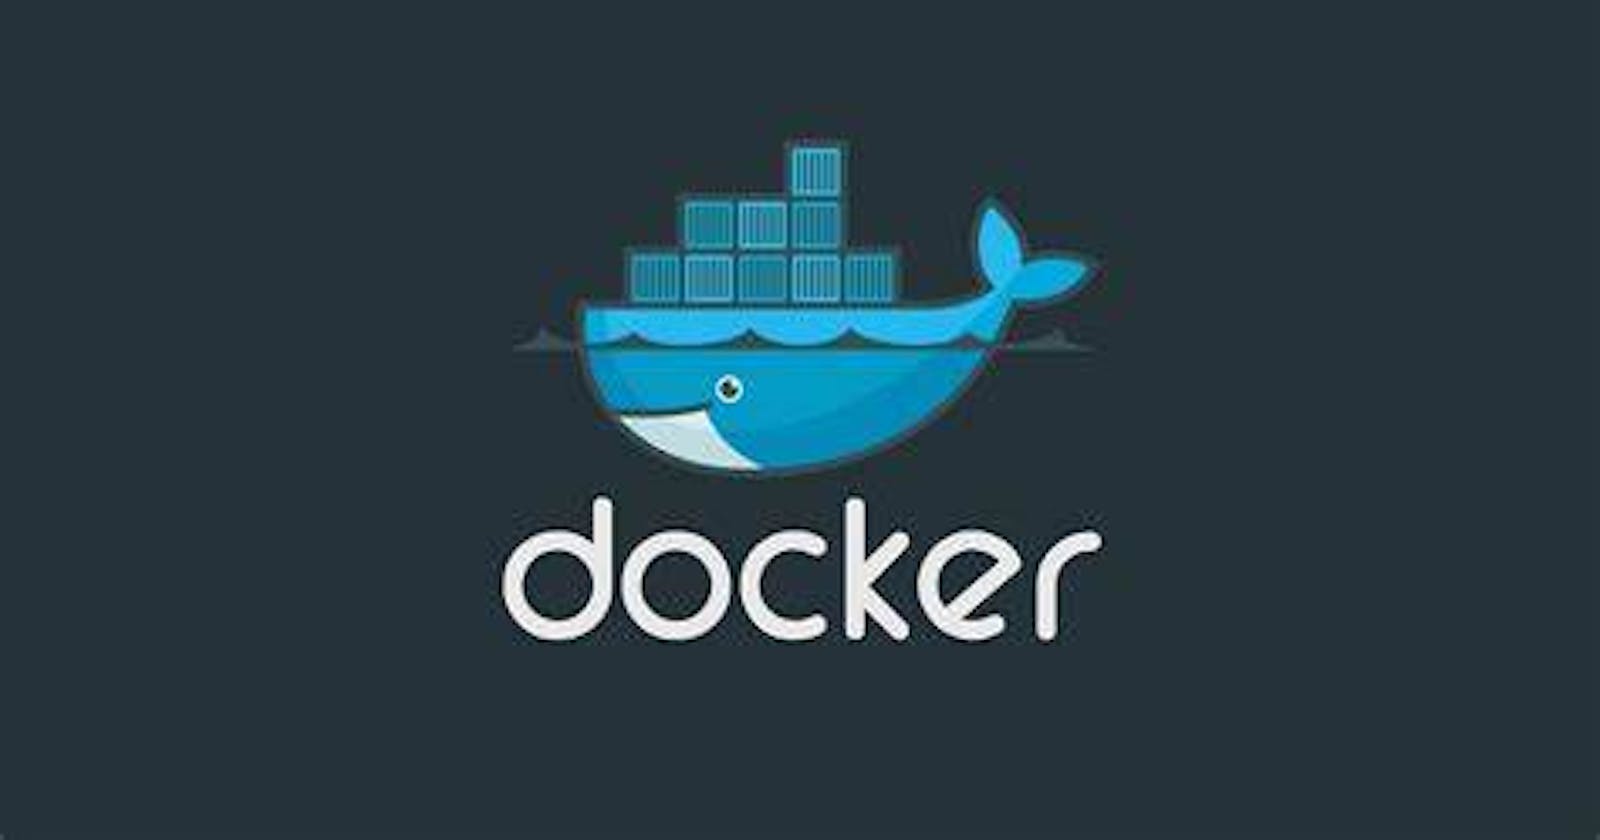 Day 8: Introduction to Docker